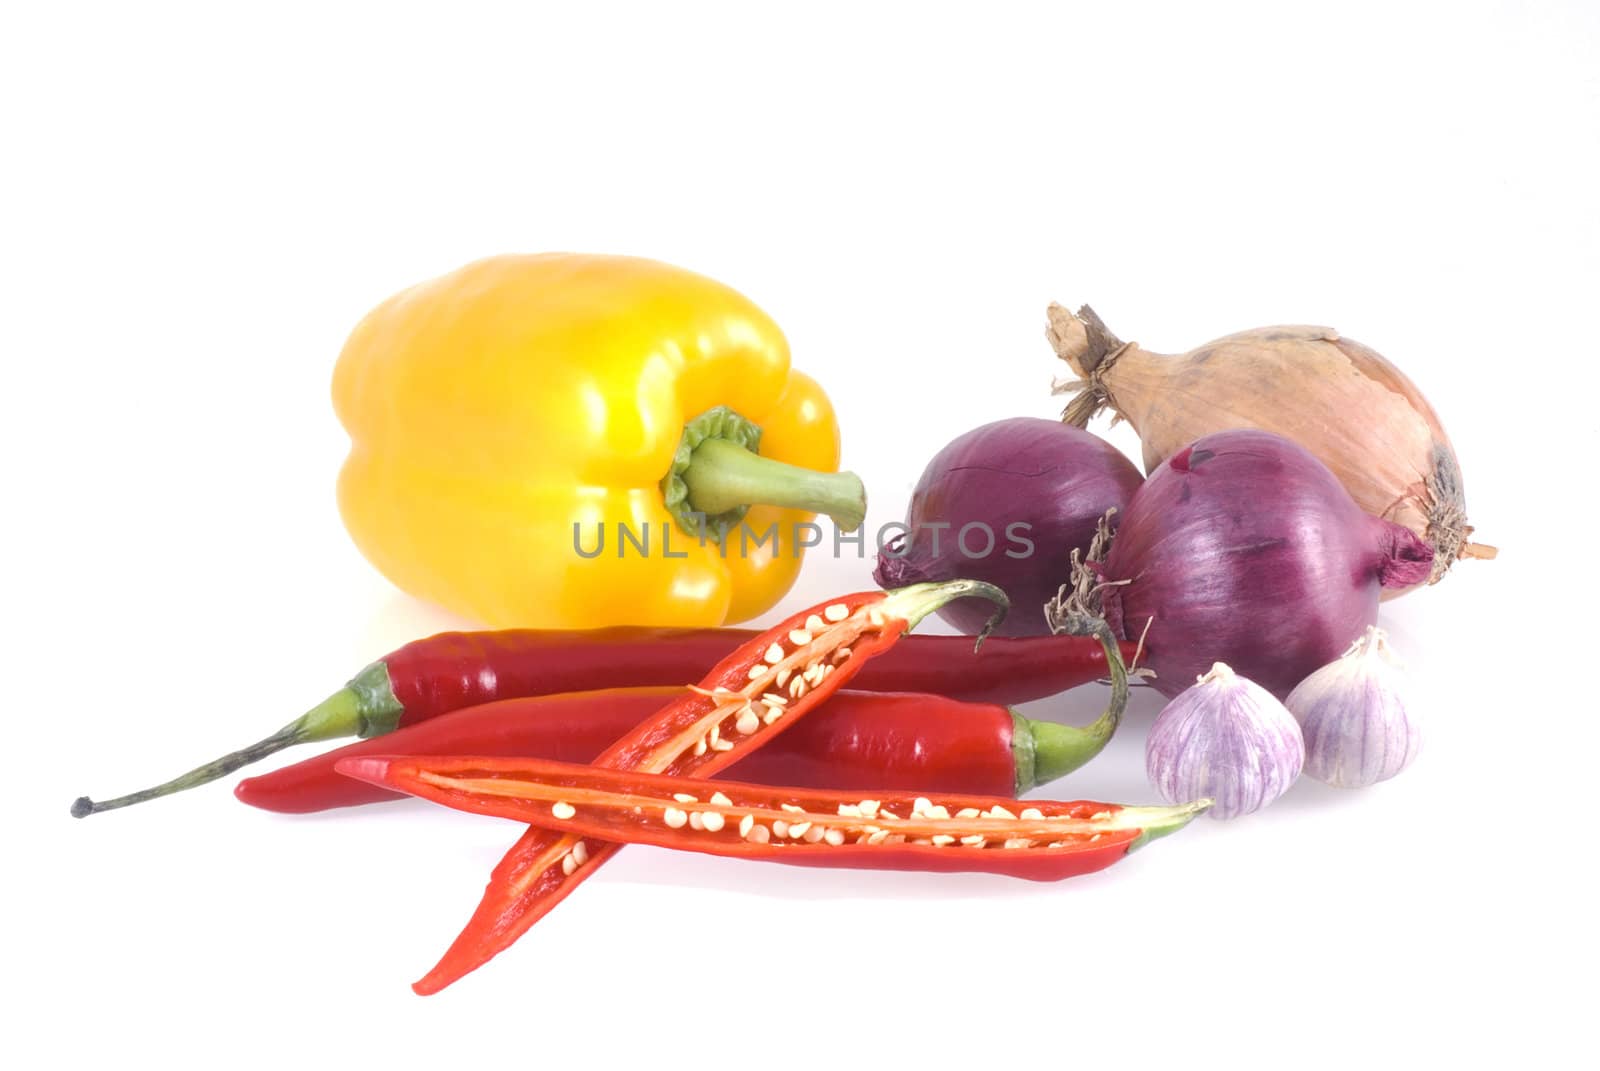 Different kinds of vegetables isolated on a white background.